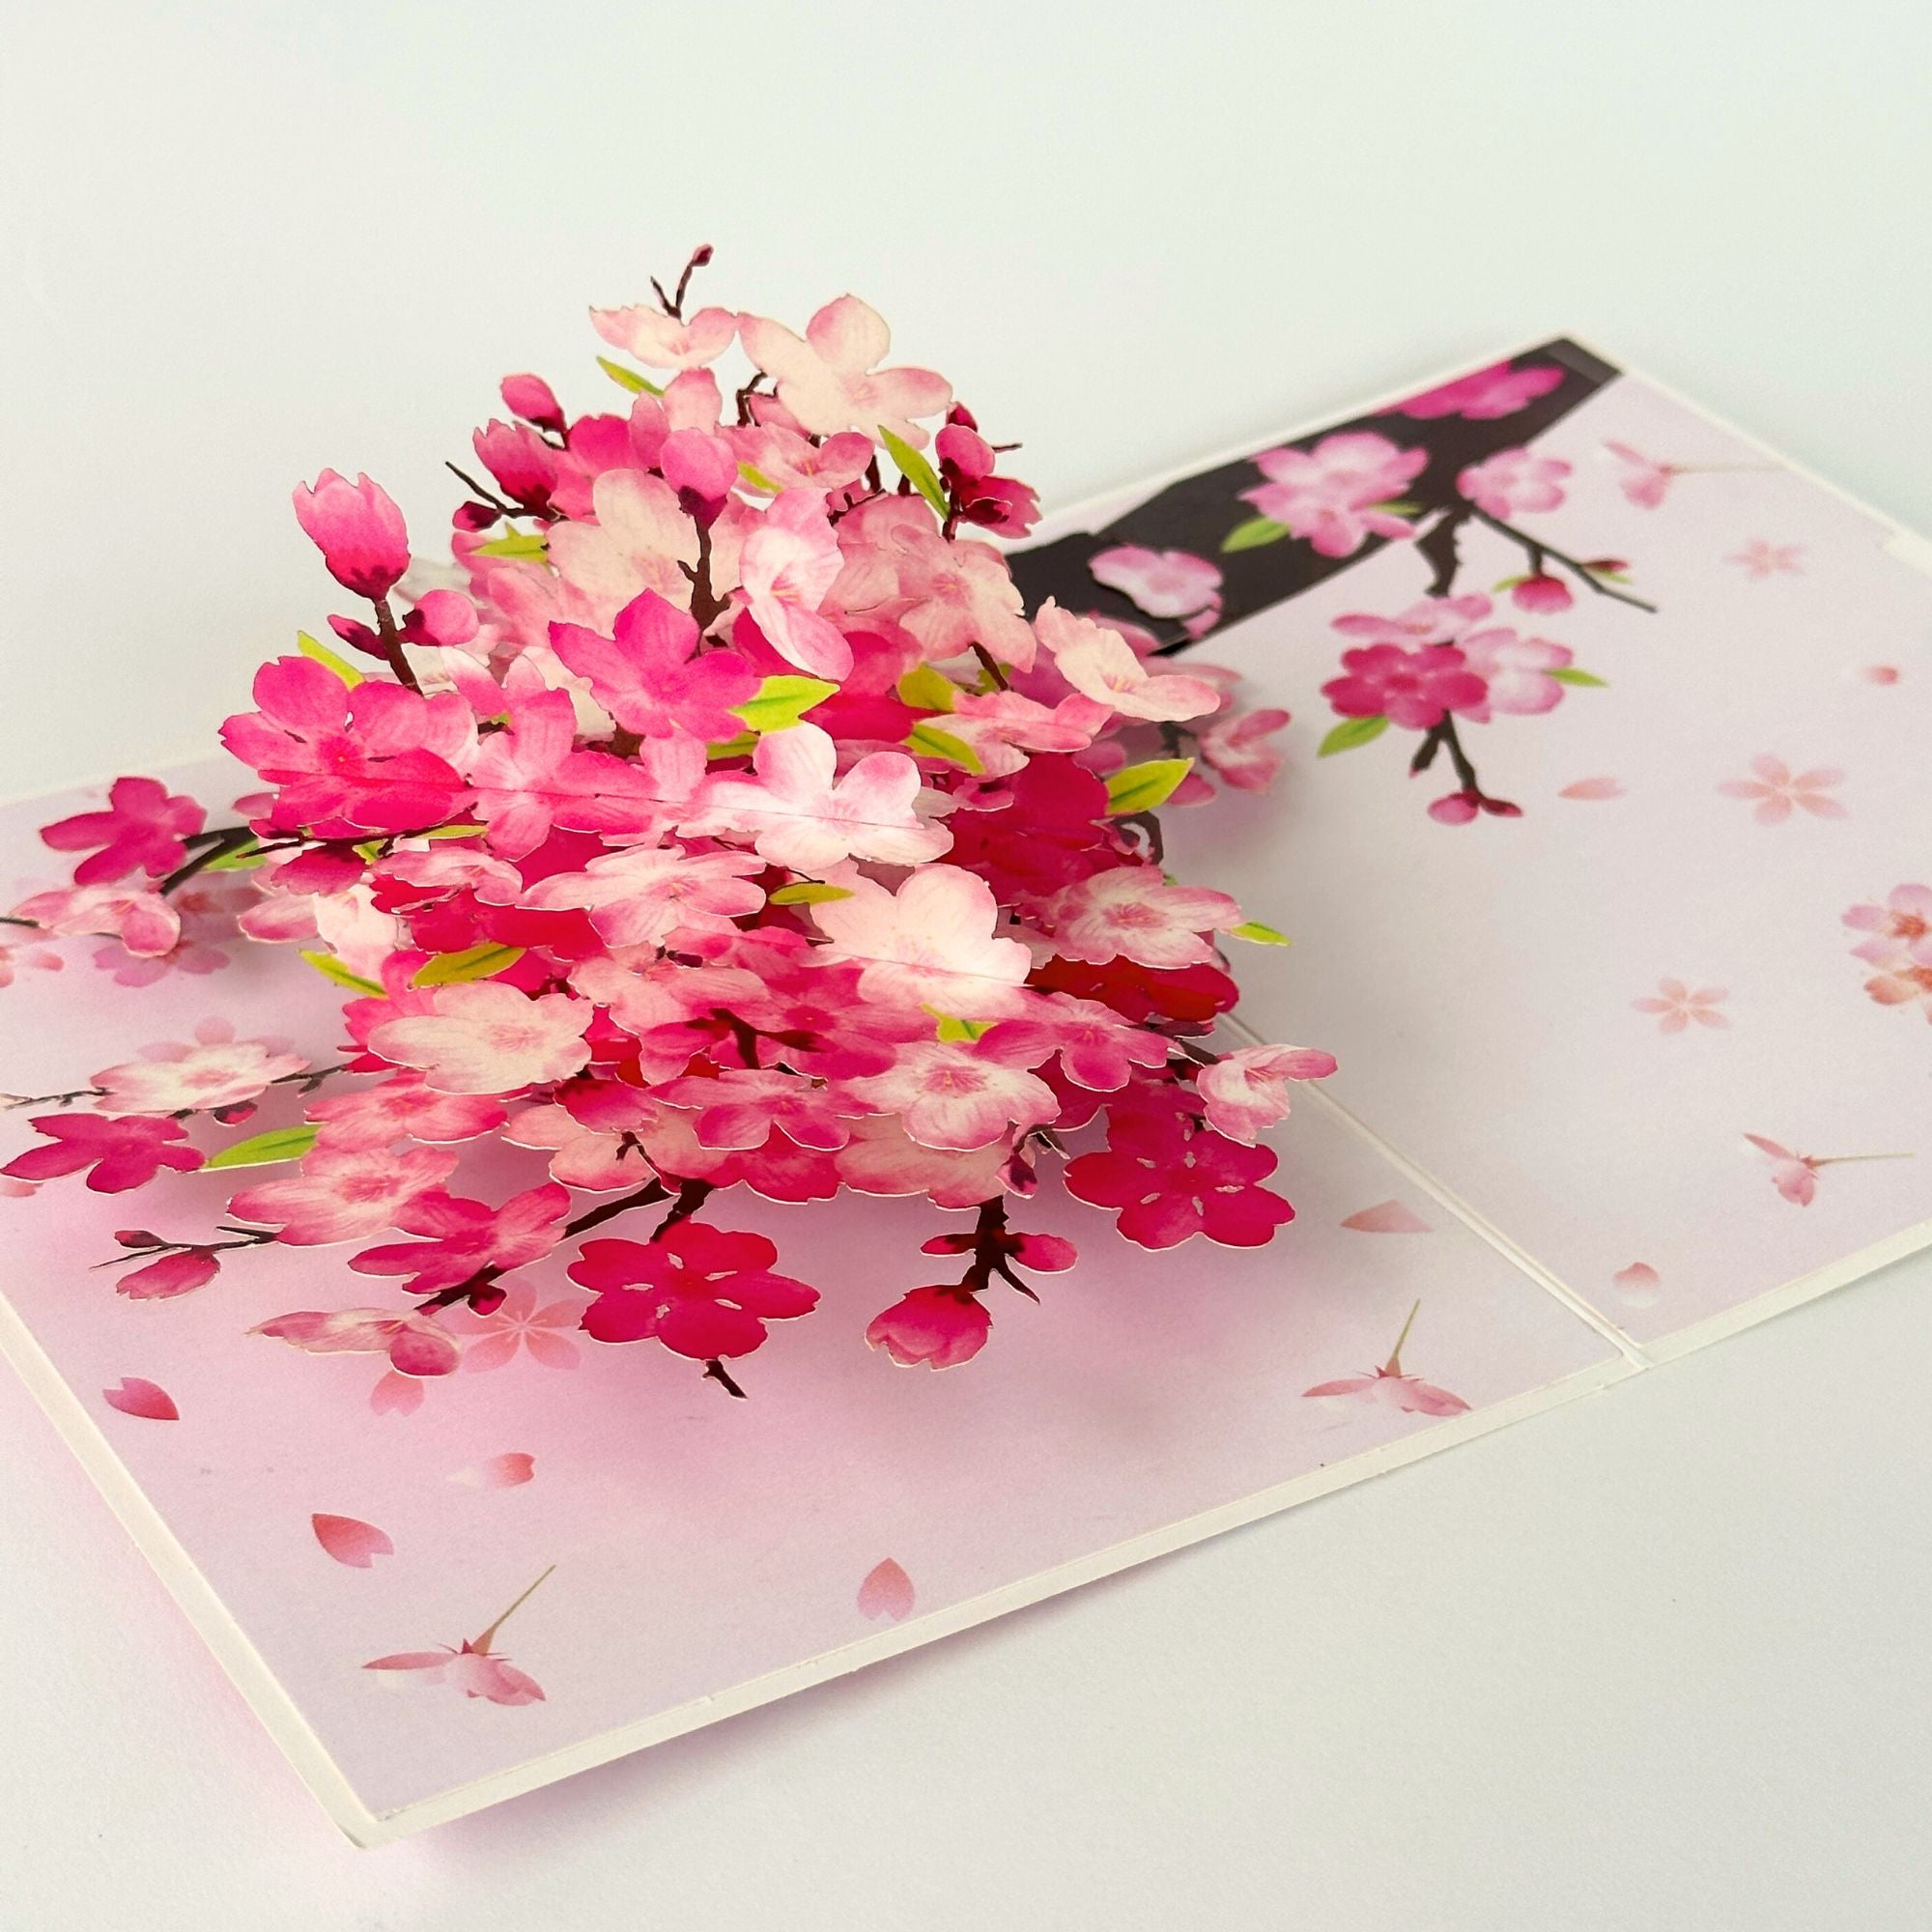 Pop Up Greeting Card Spring Cherry Blossom Blooming Colorful Nature Card Gift Idea Love Thank You Birthday Family Card Mother's Day Gift